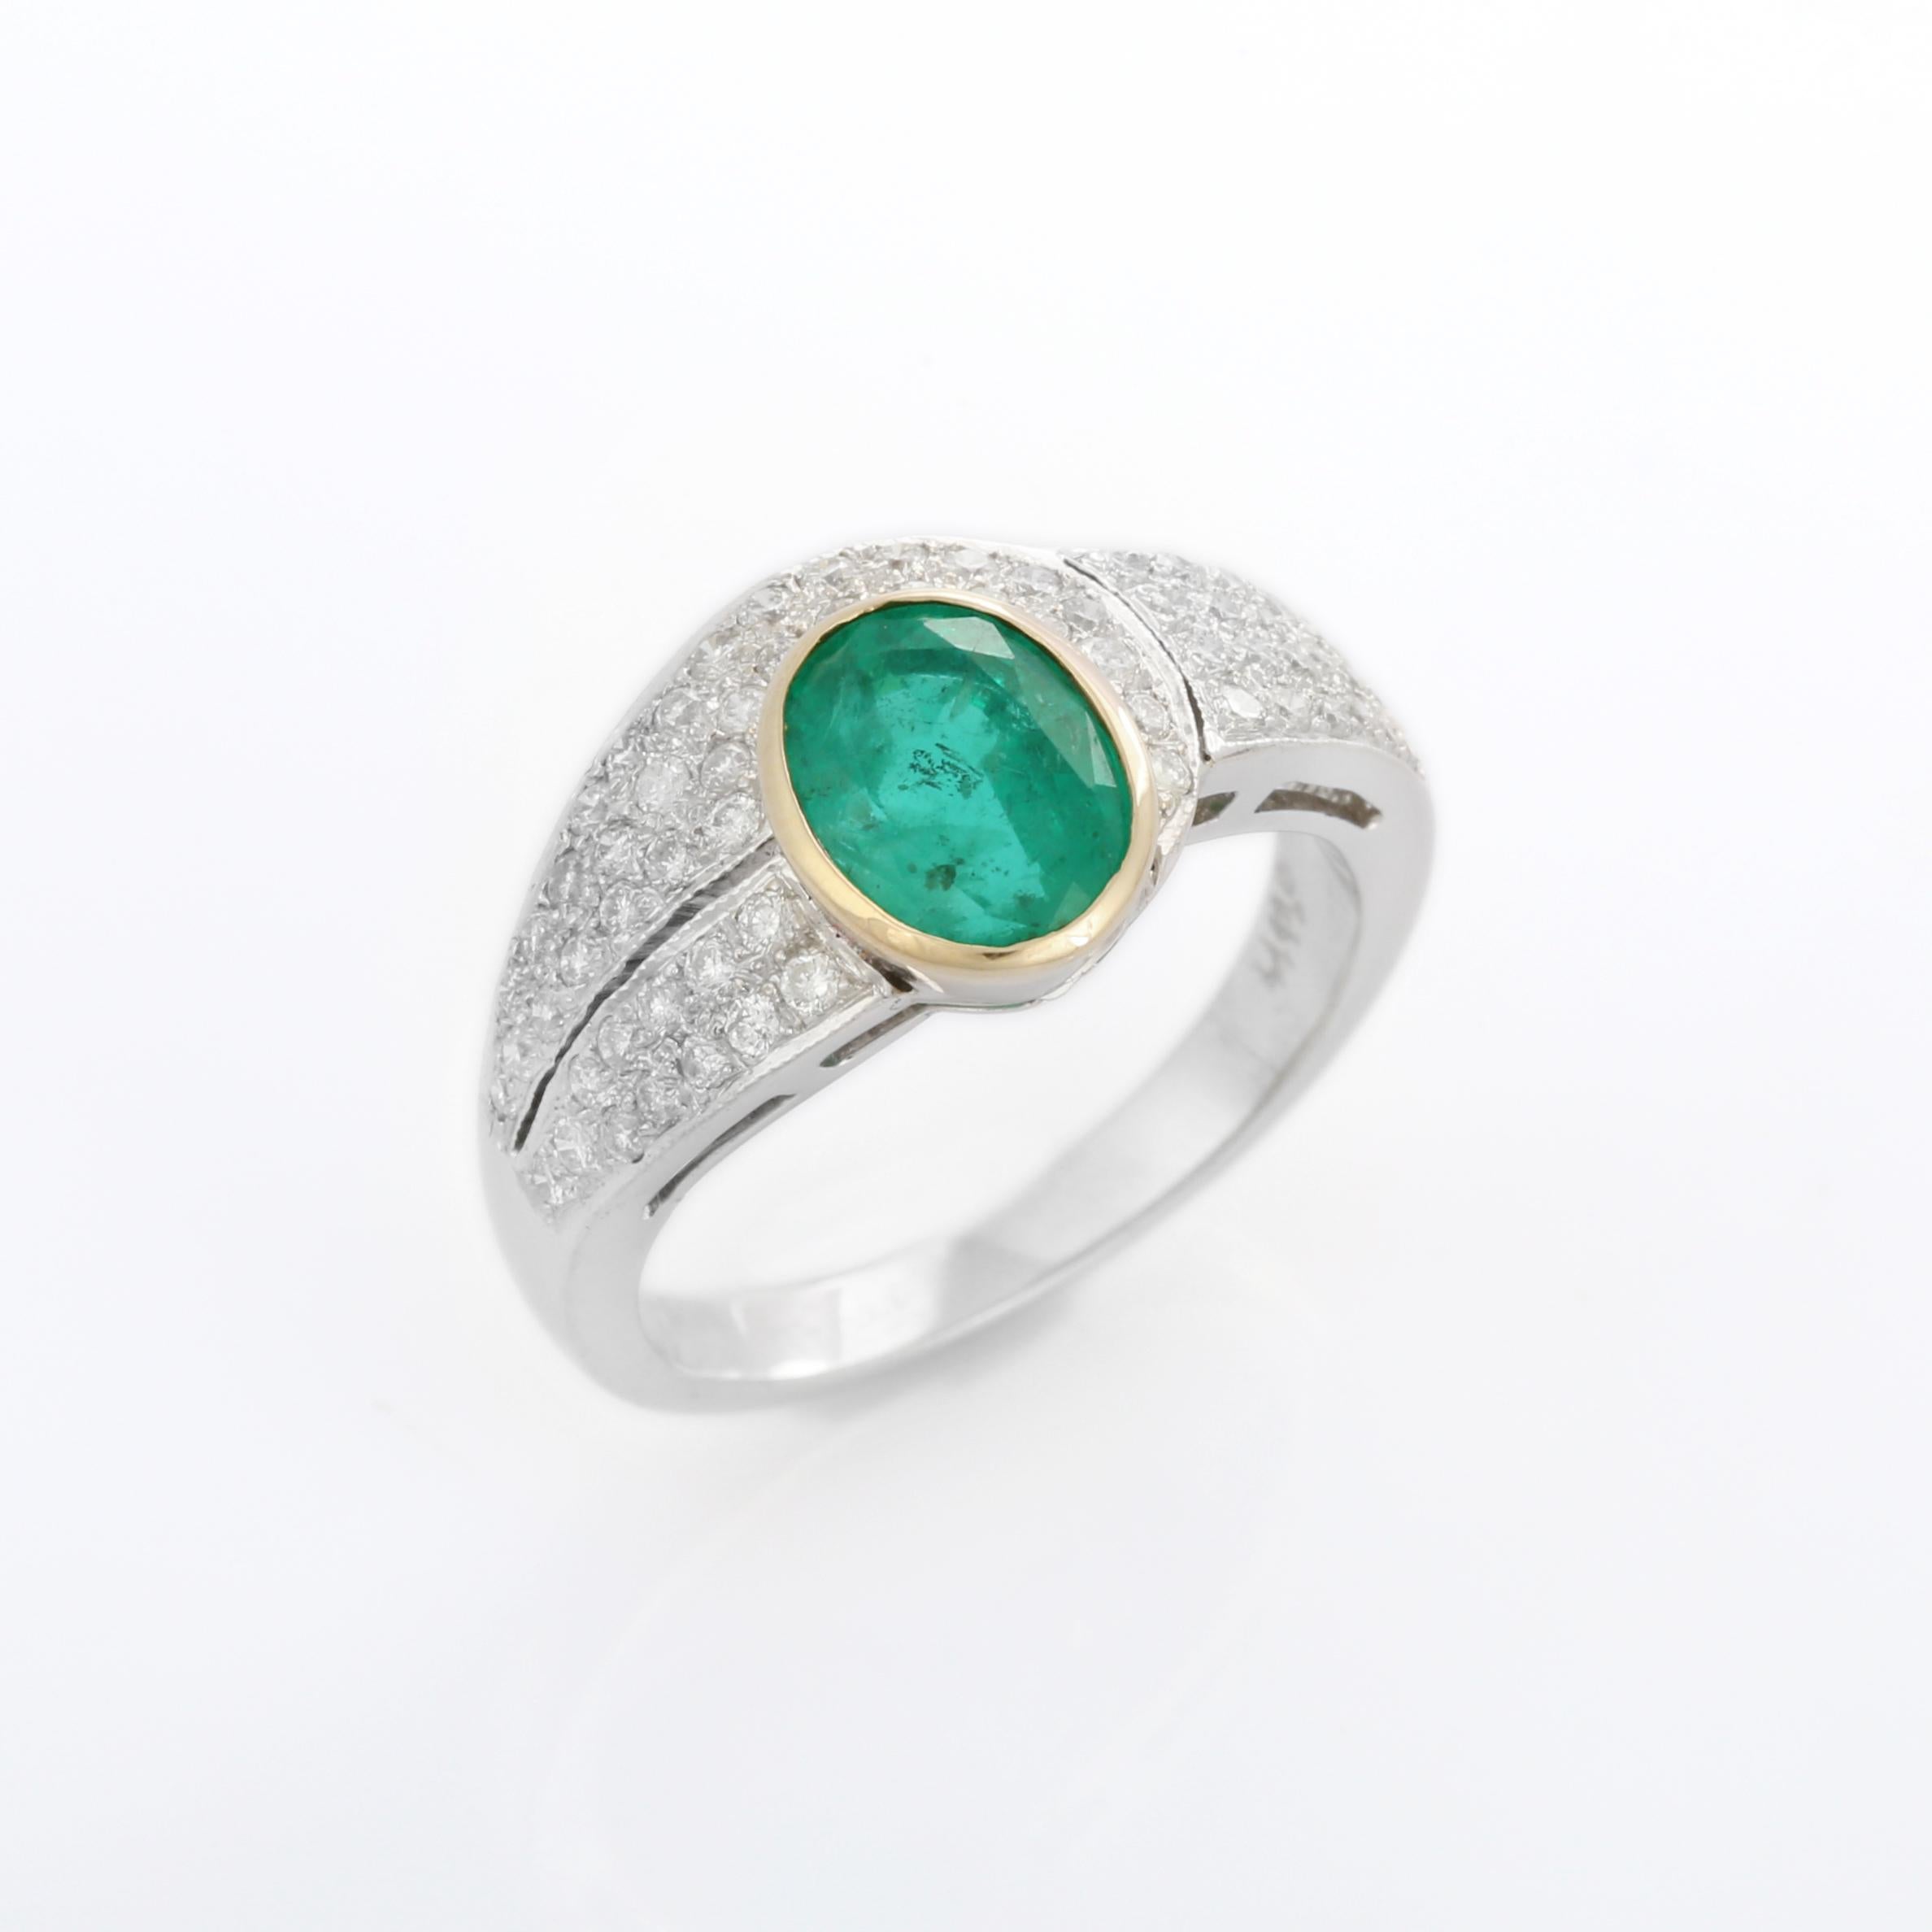 For Sale:  2.45 Carat Emerald and Diamond Ring in 18K White Gold  8